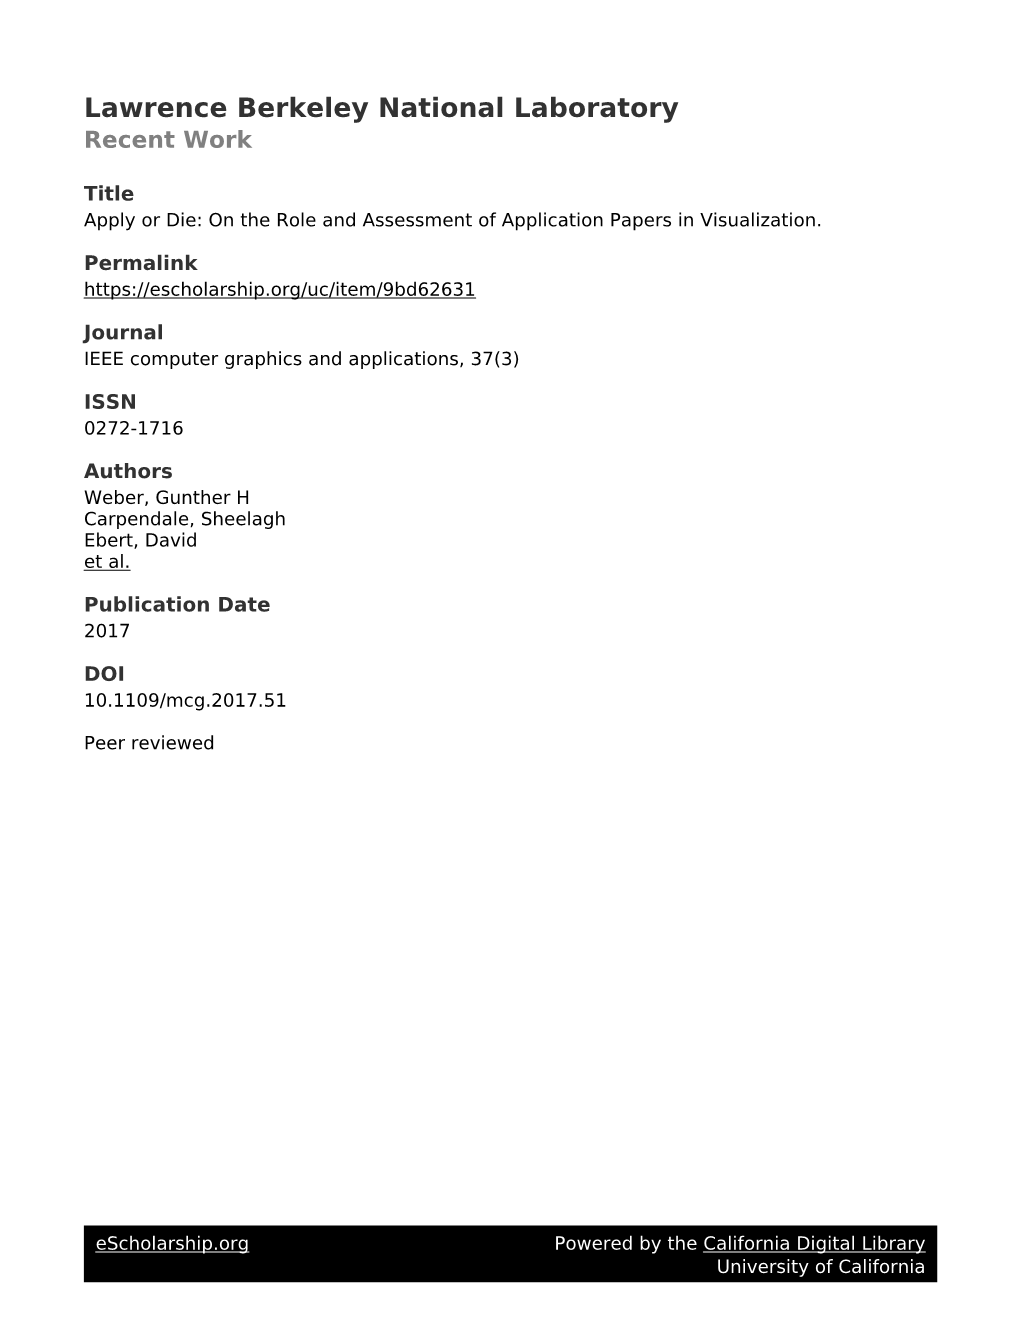 Apply Or Die: on the Role and Assessment of Application Papers in Visualization